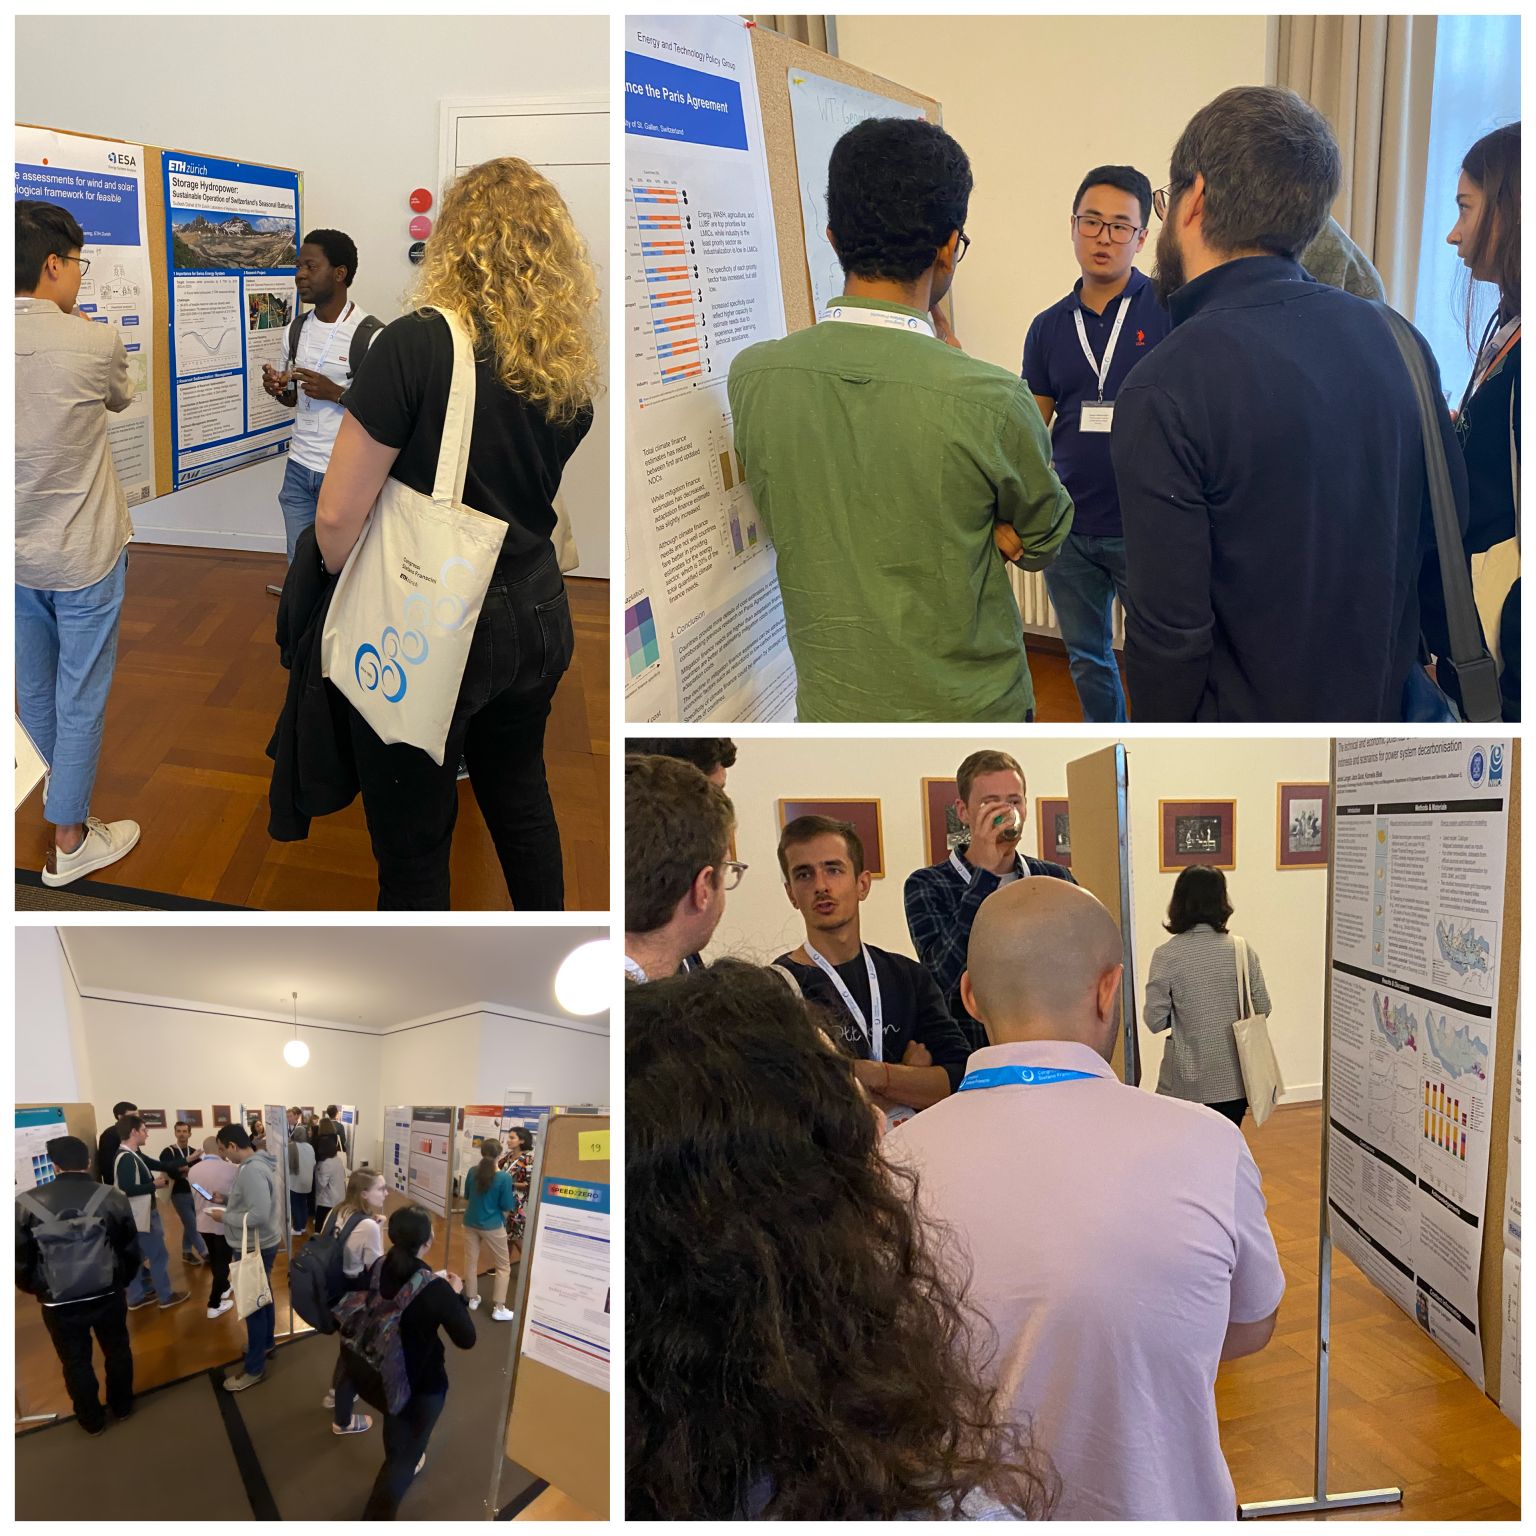 Collection of photos from the poster presentations from participants